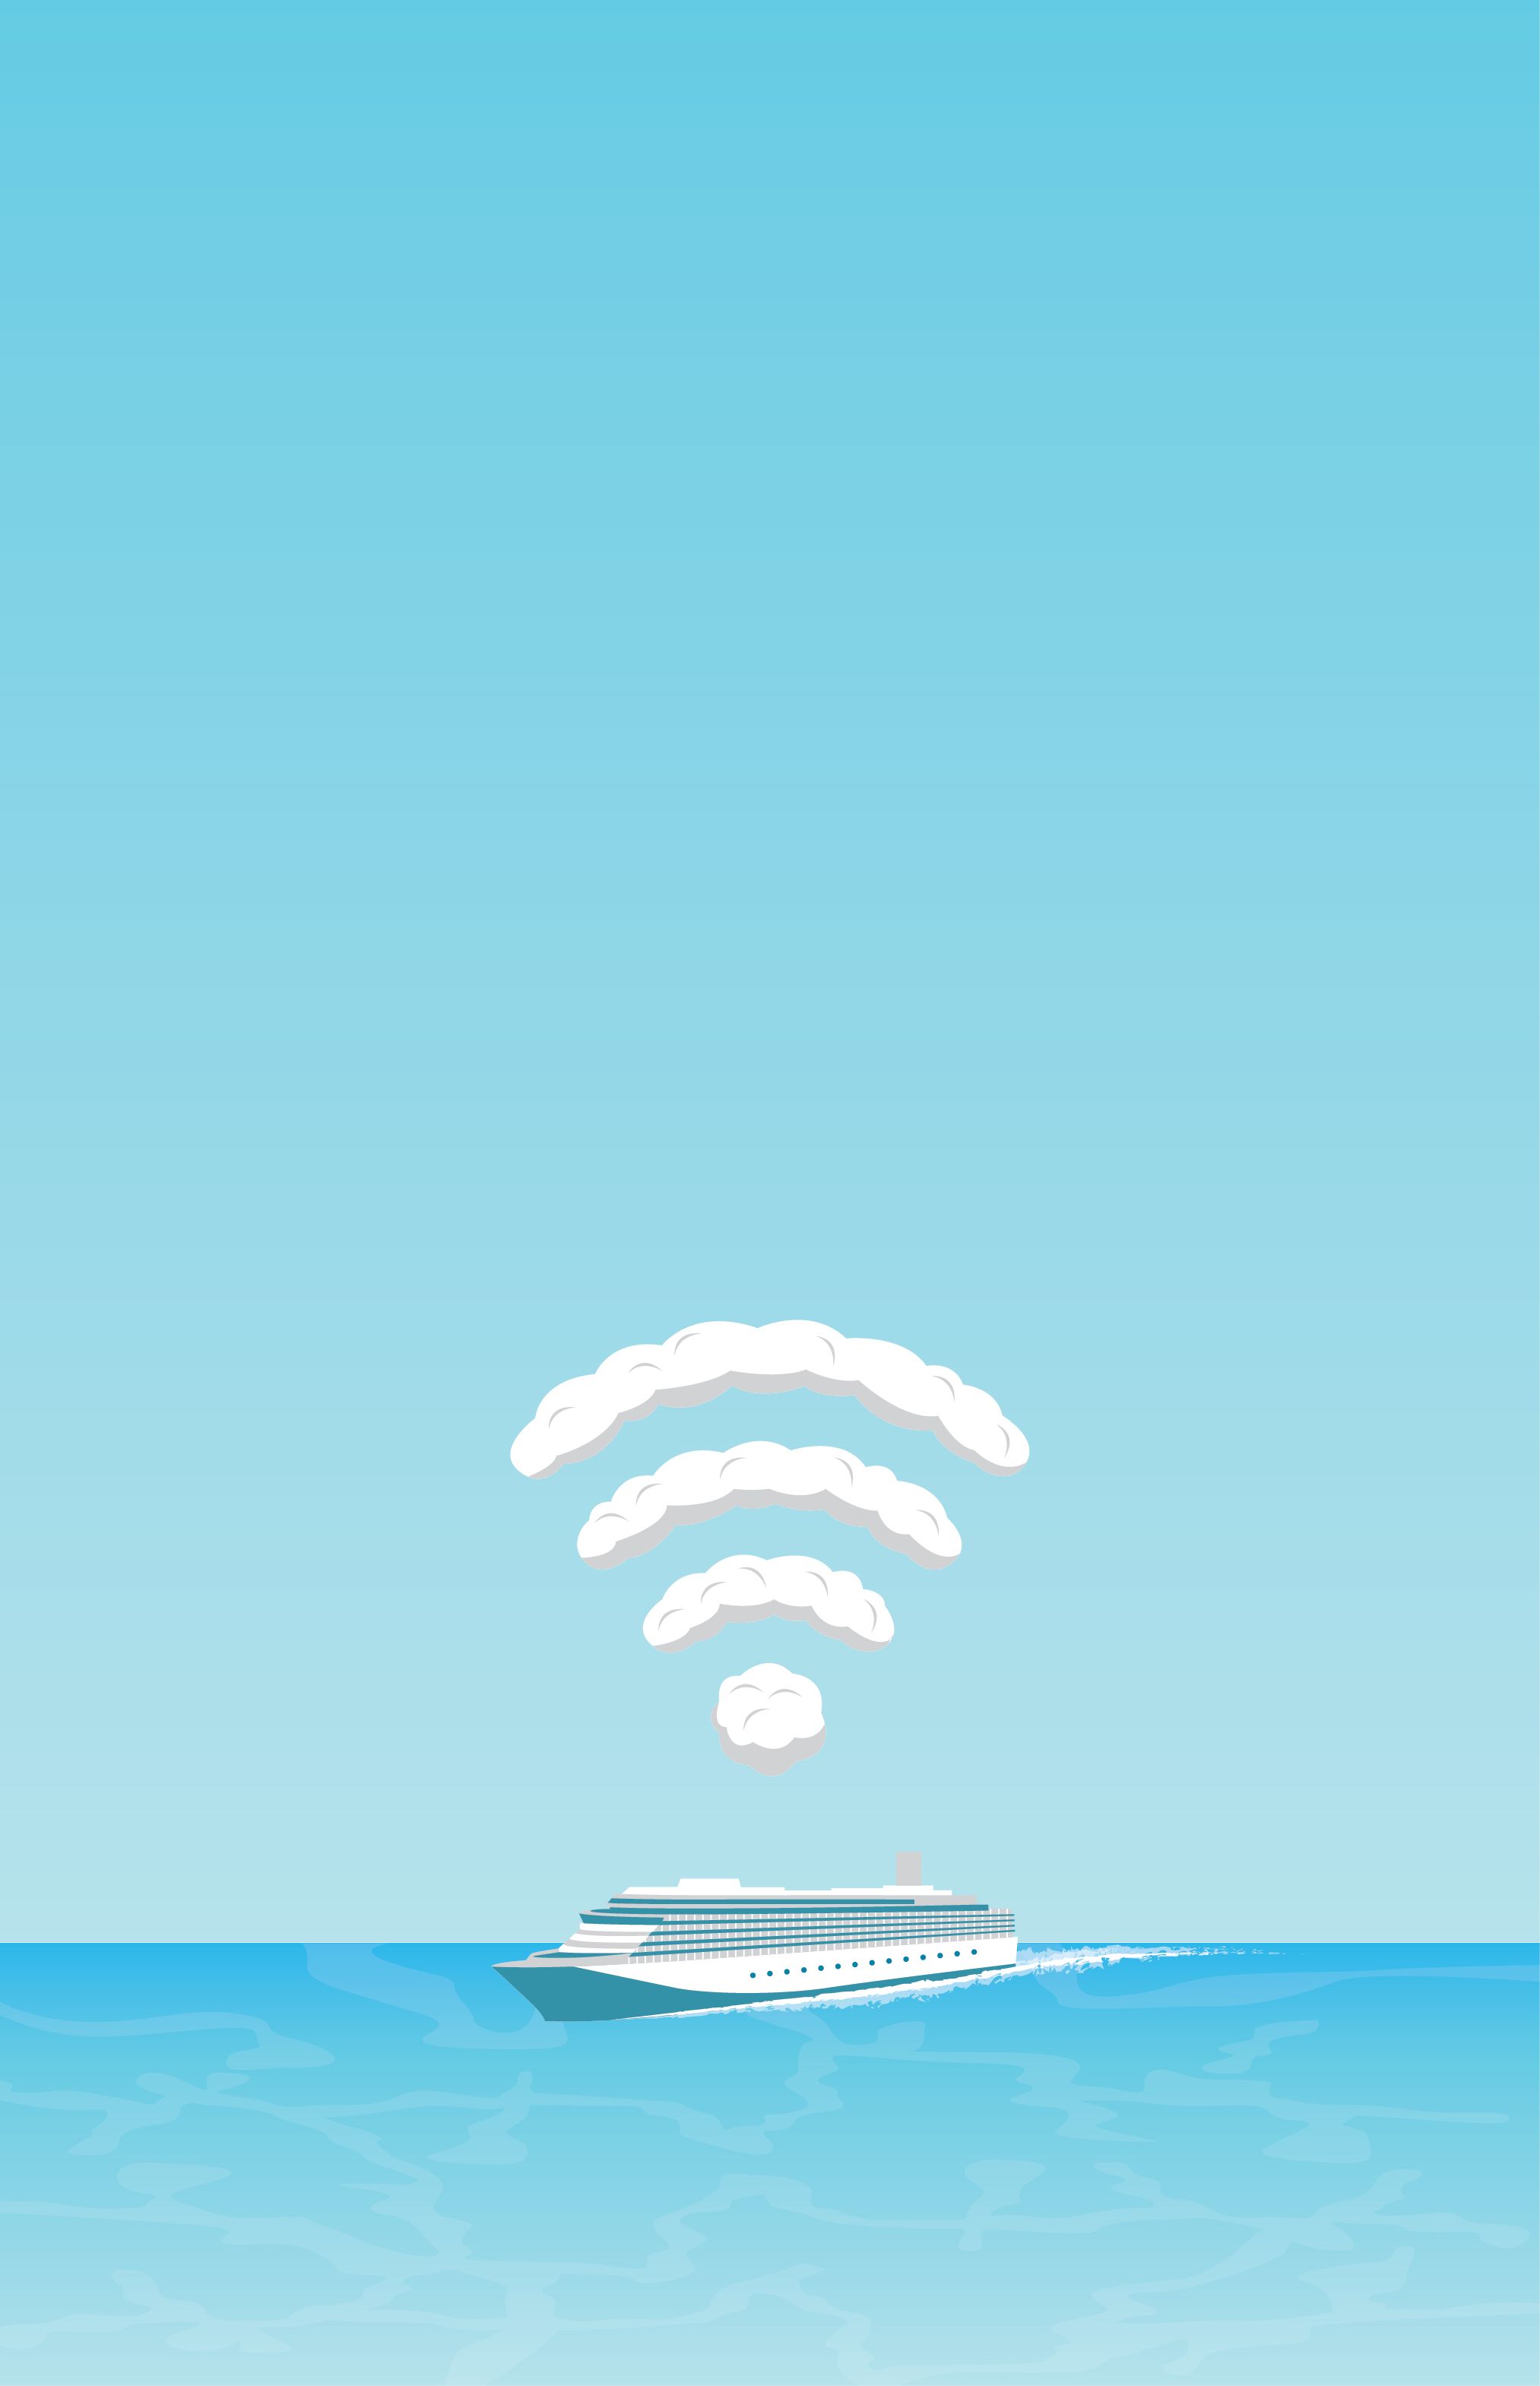 Illustration of a cruise ship out in the ocean with clouds forming the shape of a wifi signal